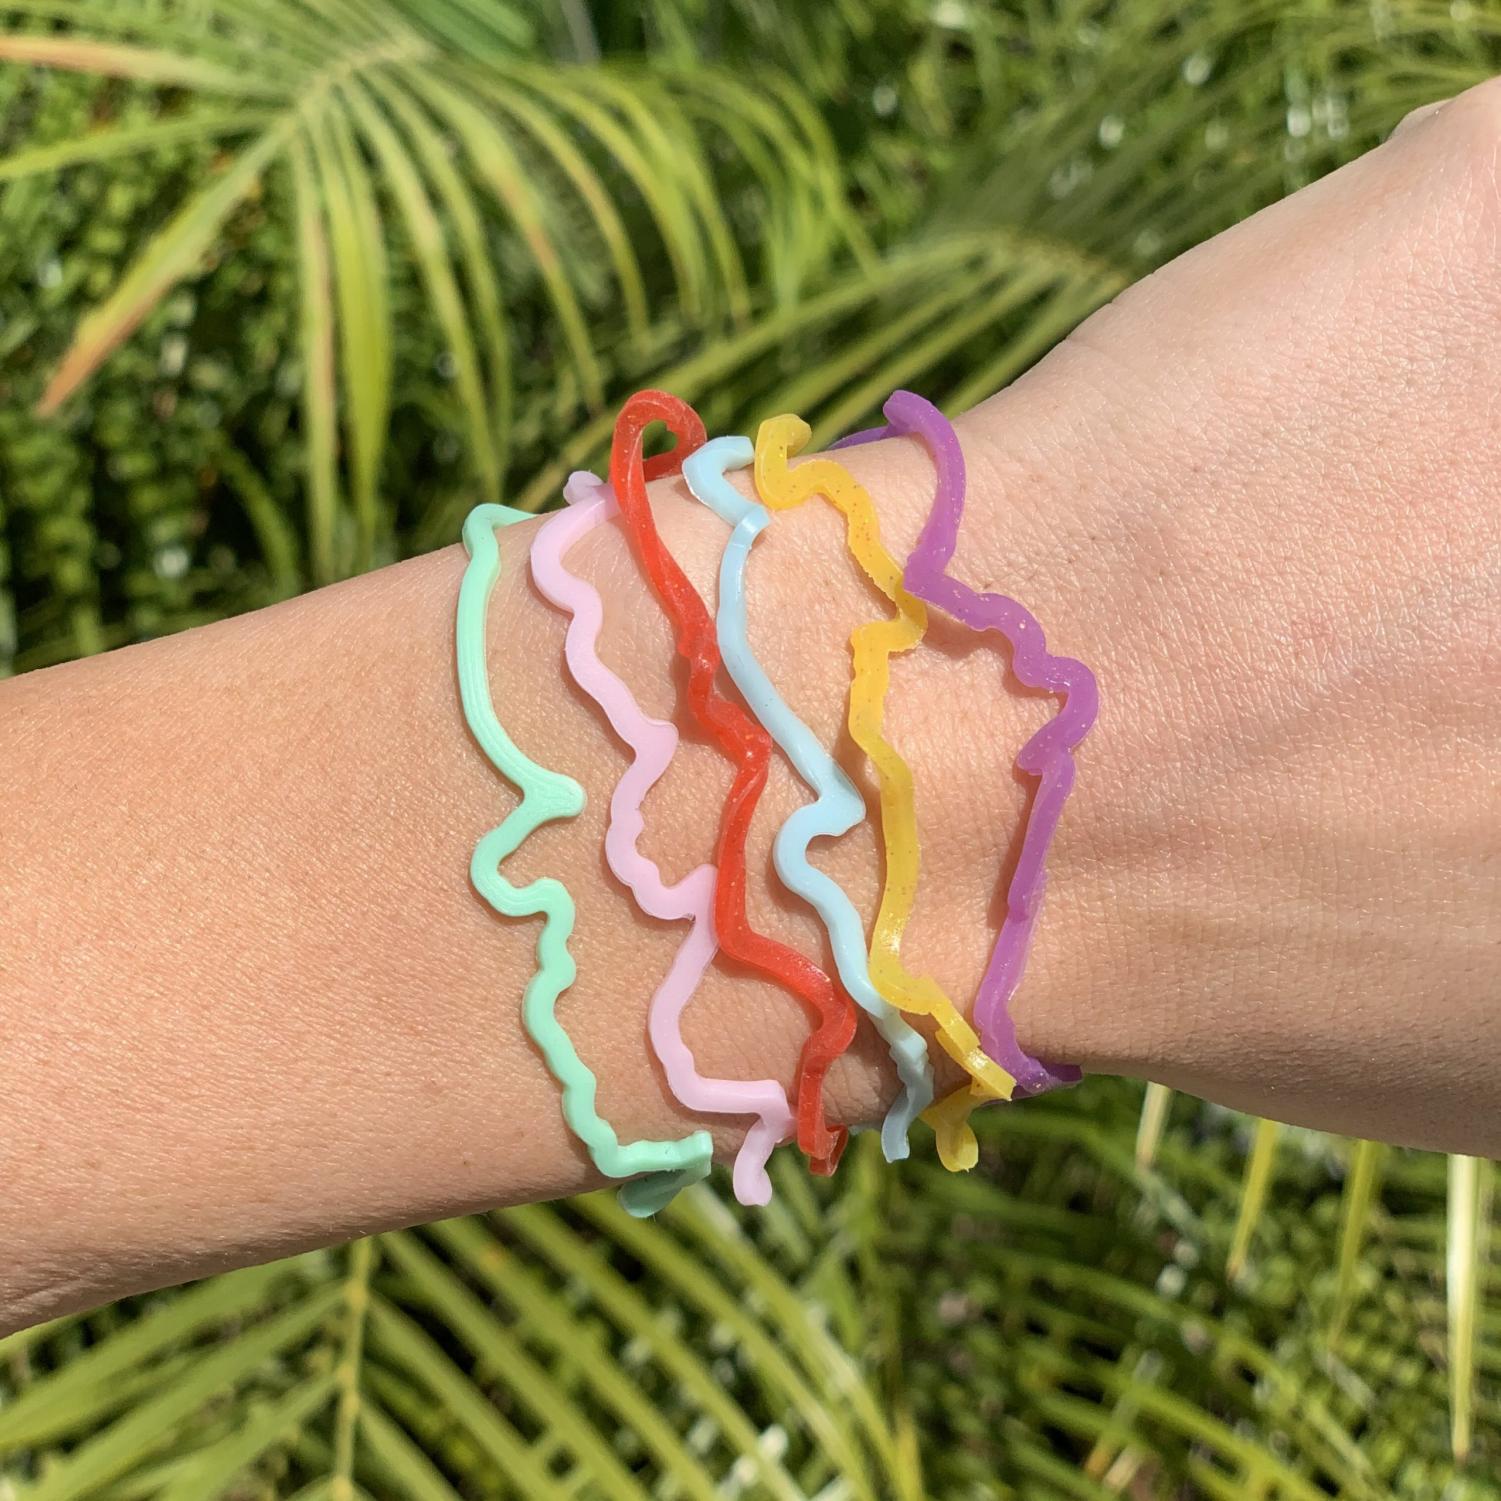 Dr. Manny: Silly Bandz Bracelet Trend May Be Dangerous for Kids | Fox News